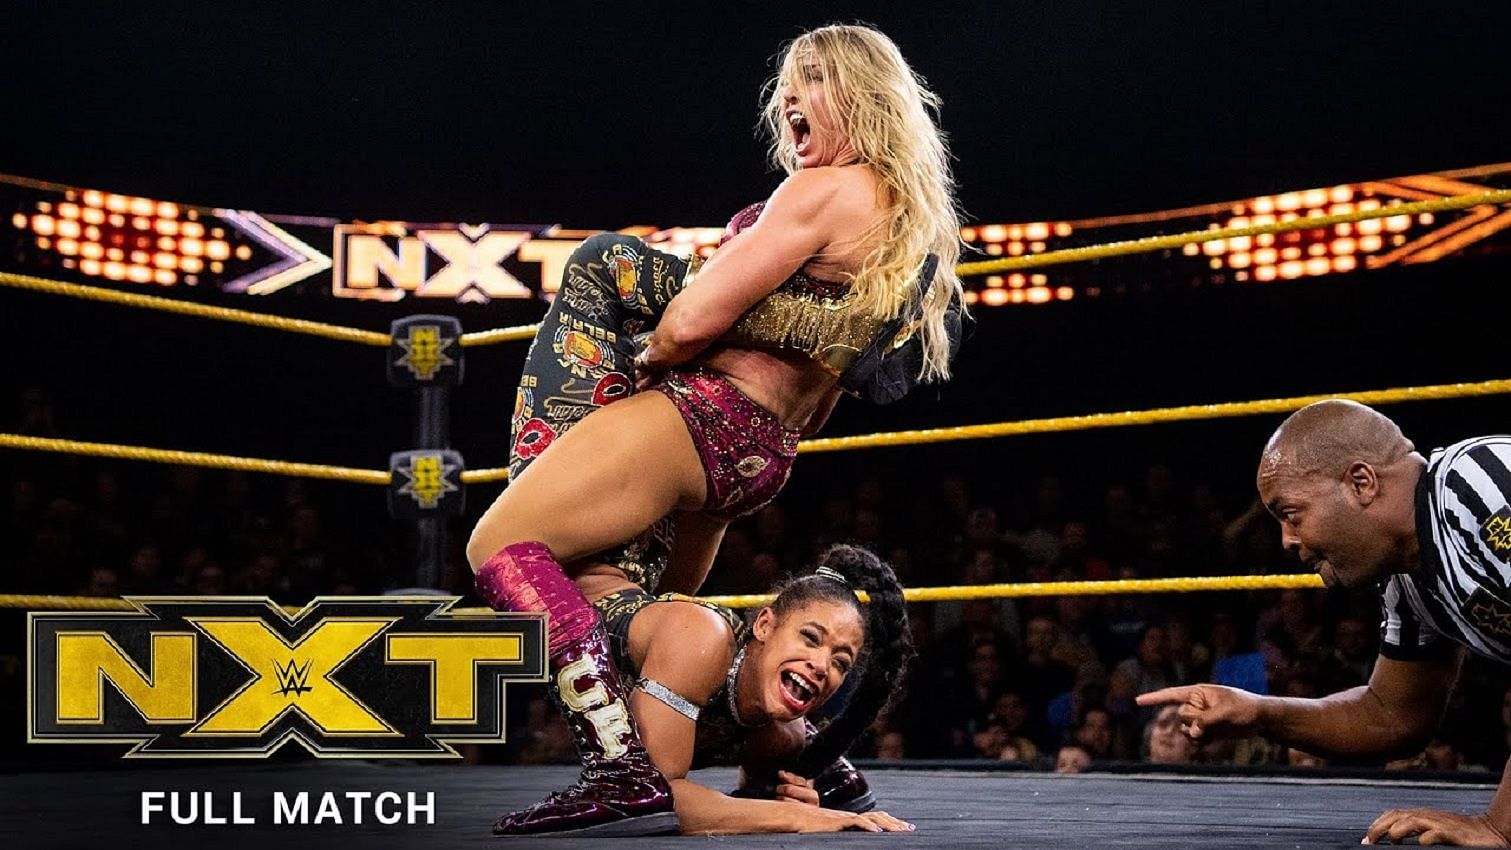 Charlotte and Bianca faced each other before, in NXT